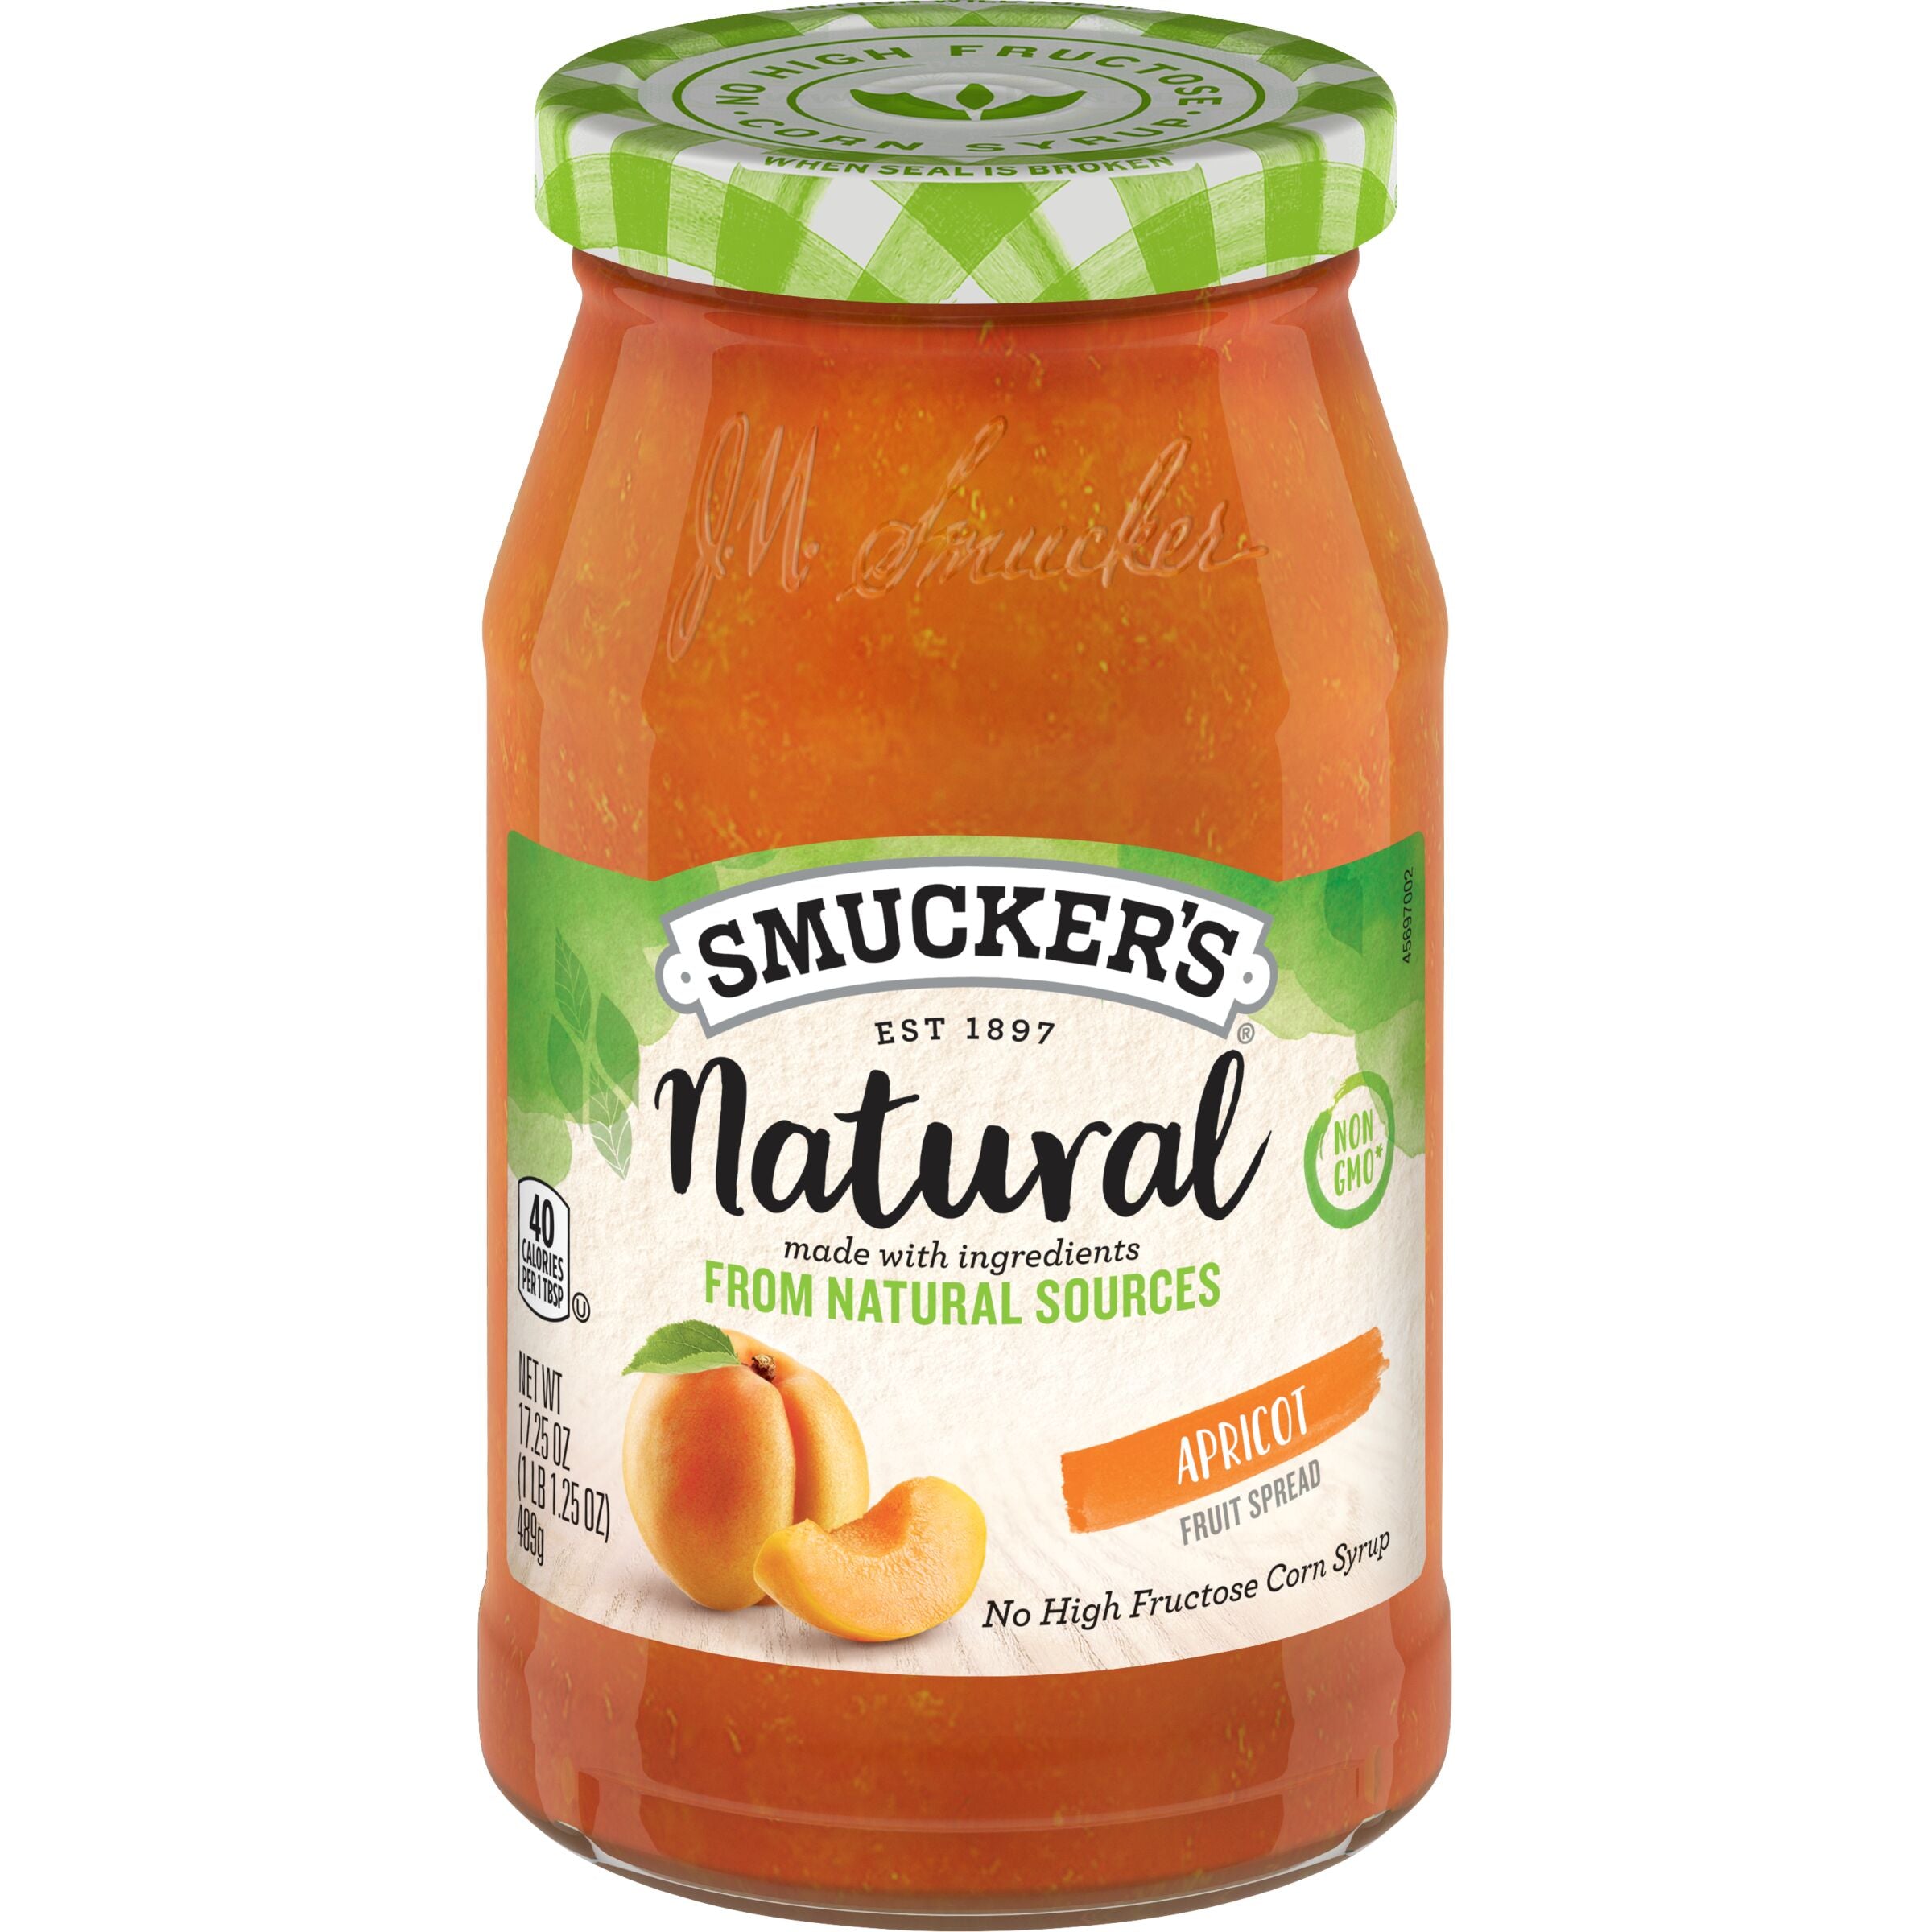 Smucker's Natural Apricot Fruit Spread, 17.25 oz